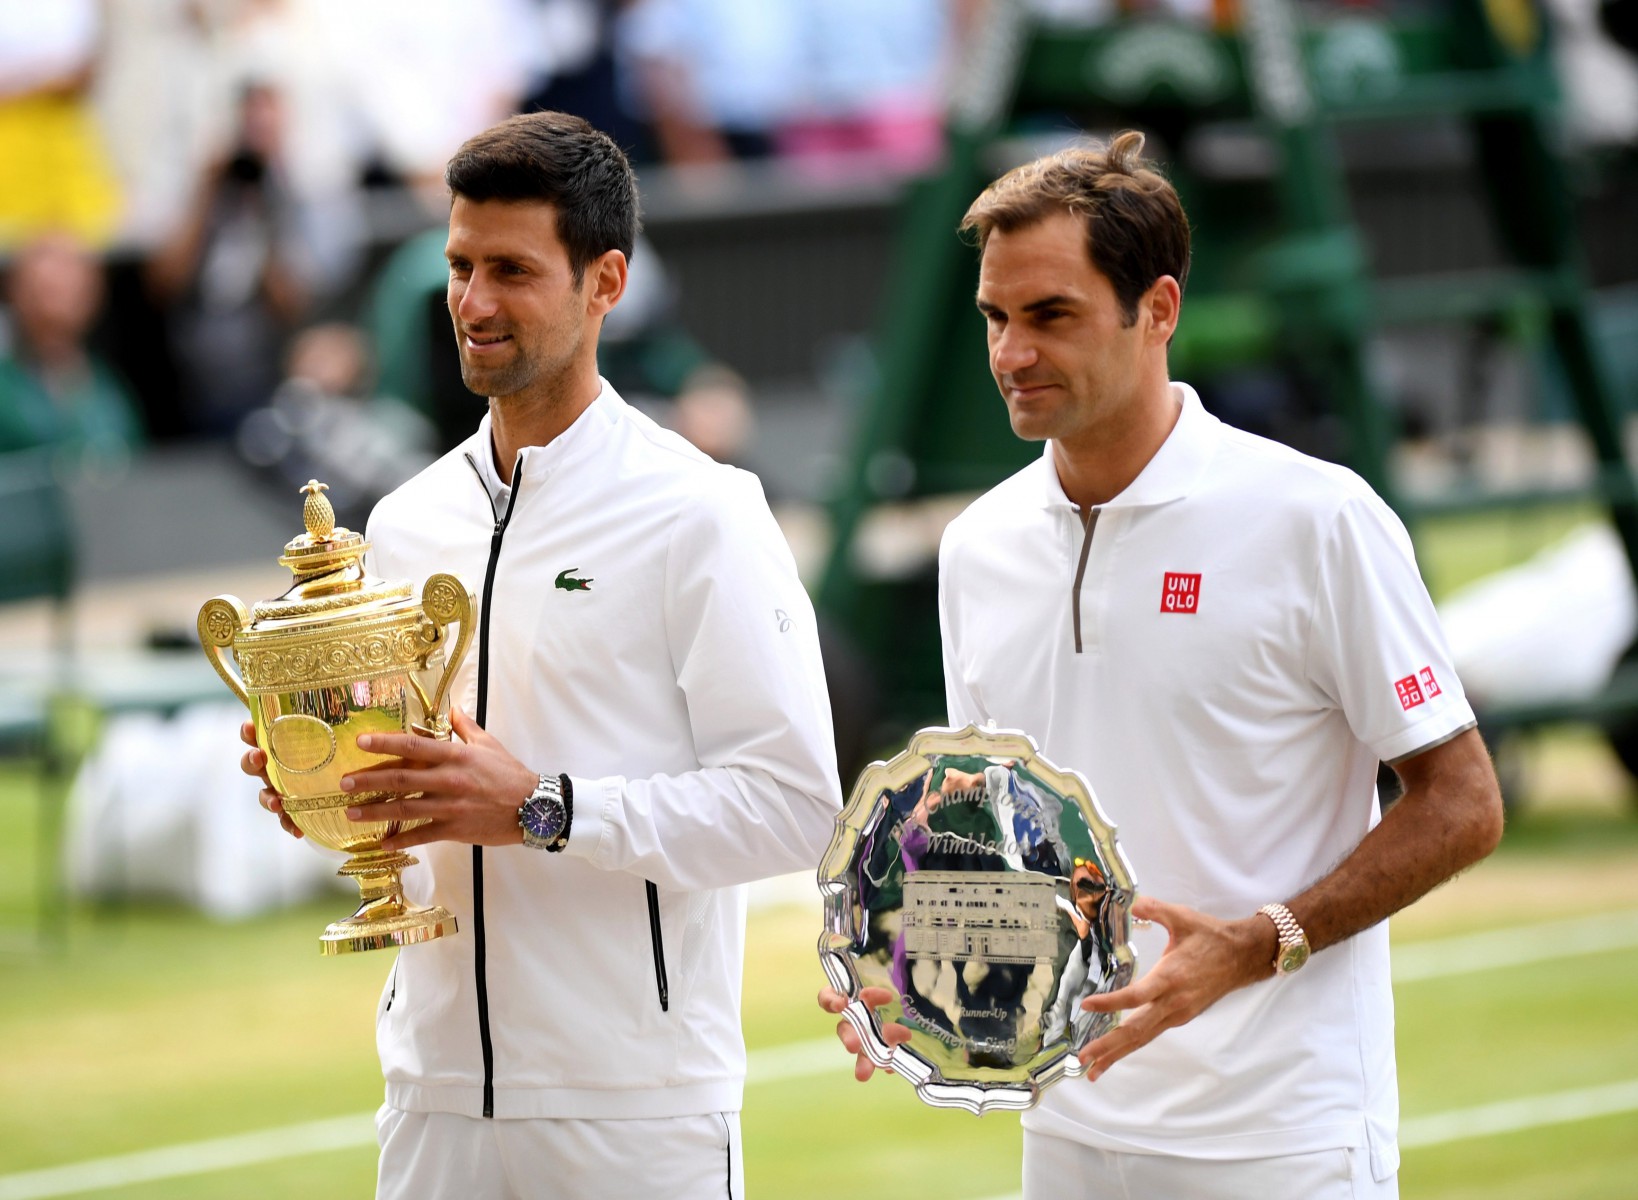 This was their first meeting since the Wimbledon final which Djokovic won 13-12 in the fifth set